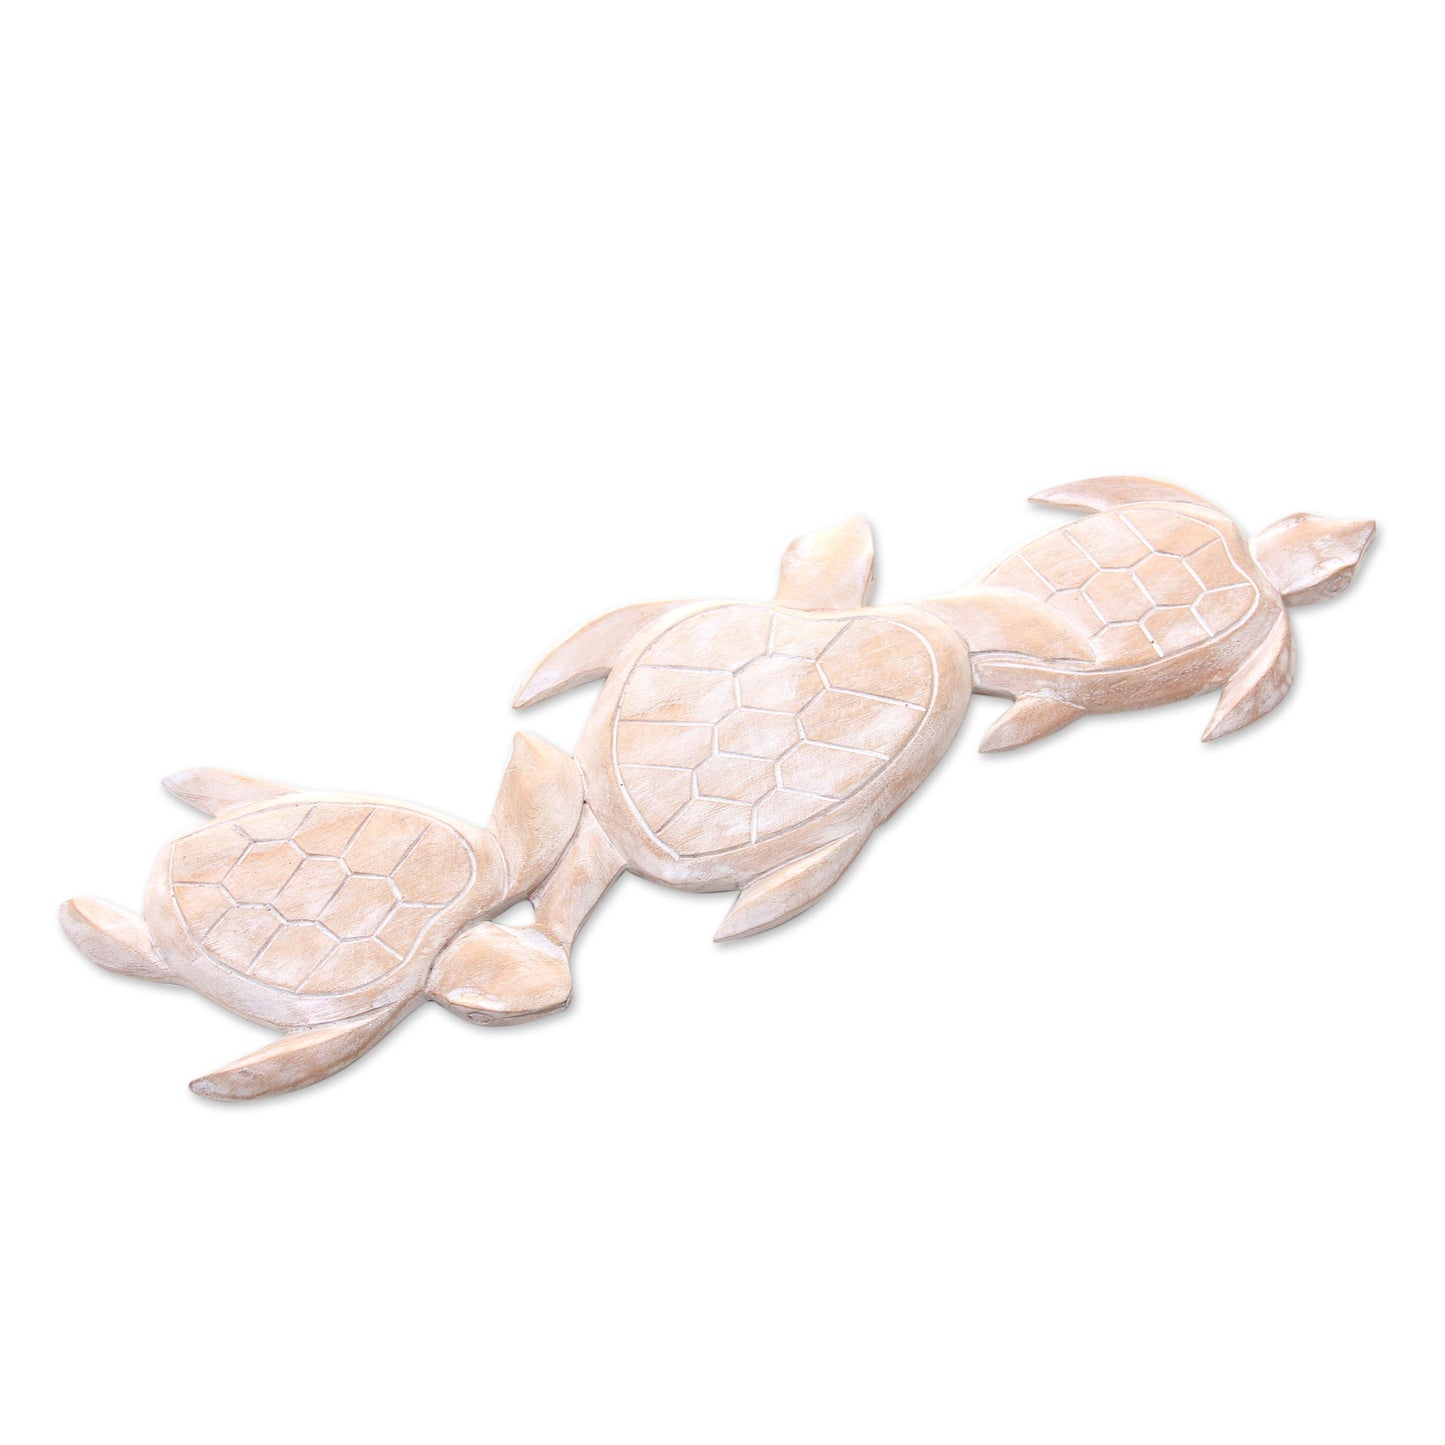 Sea Turtle Trio Antiqued White Wood Turtle Theme Relief Panel Carving